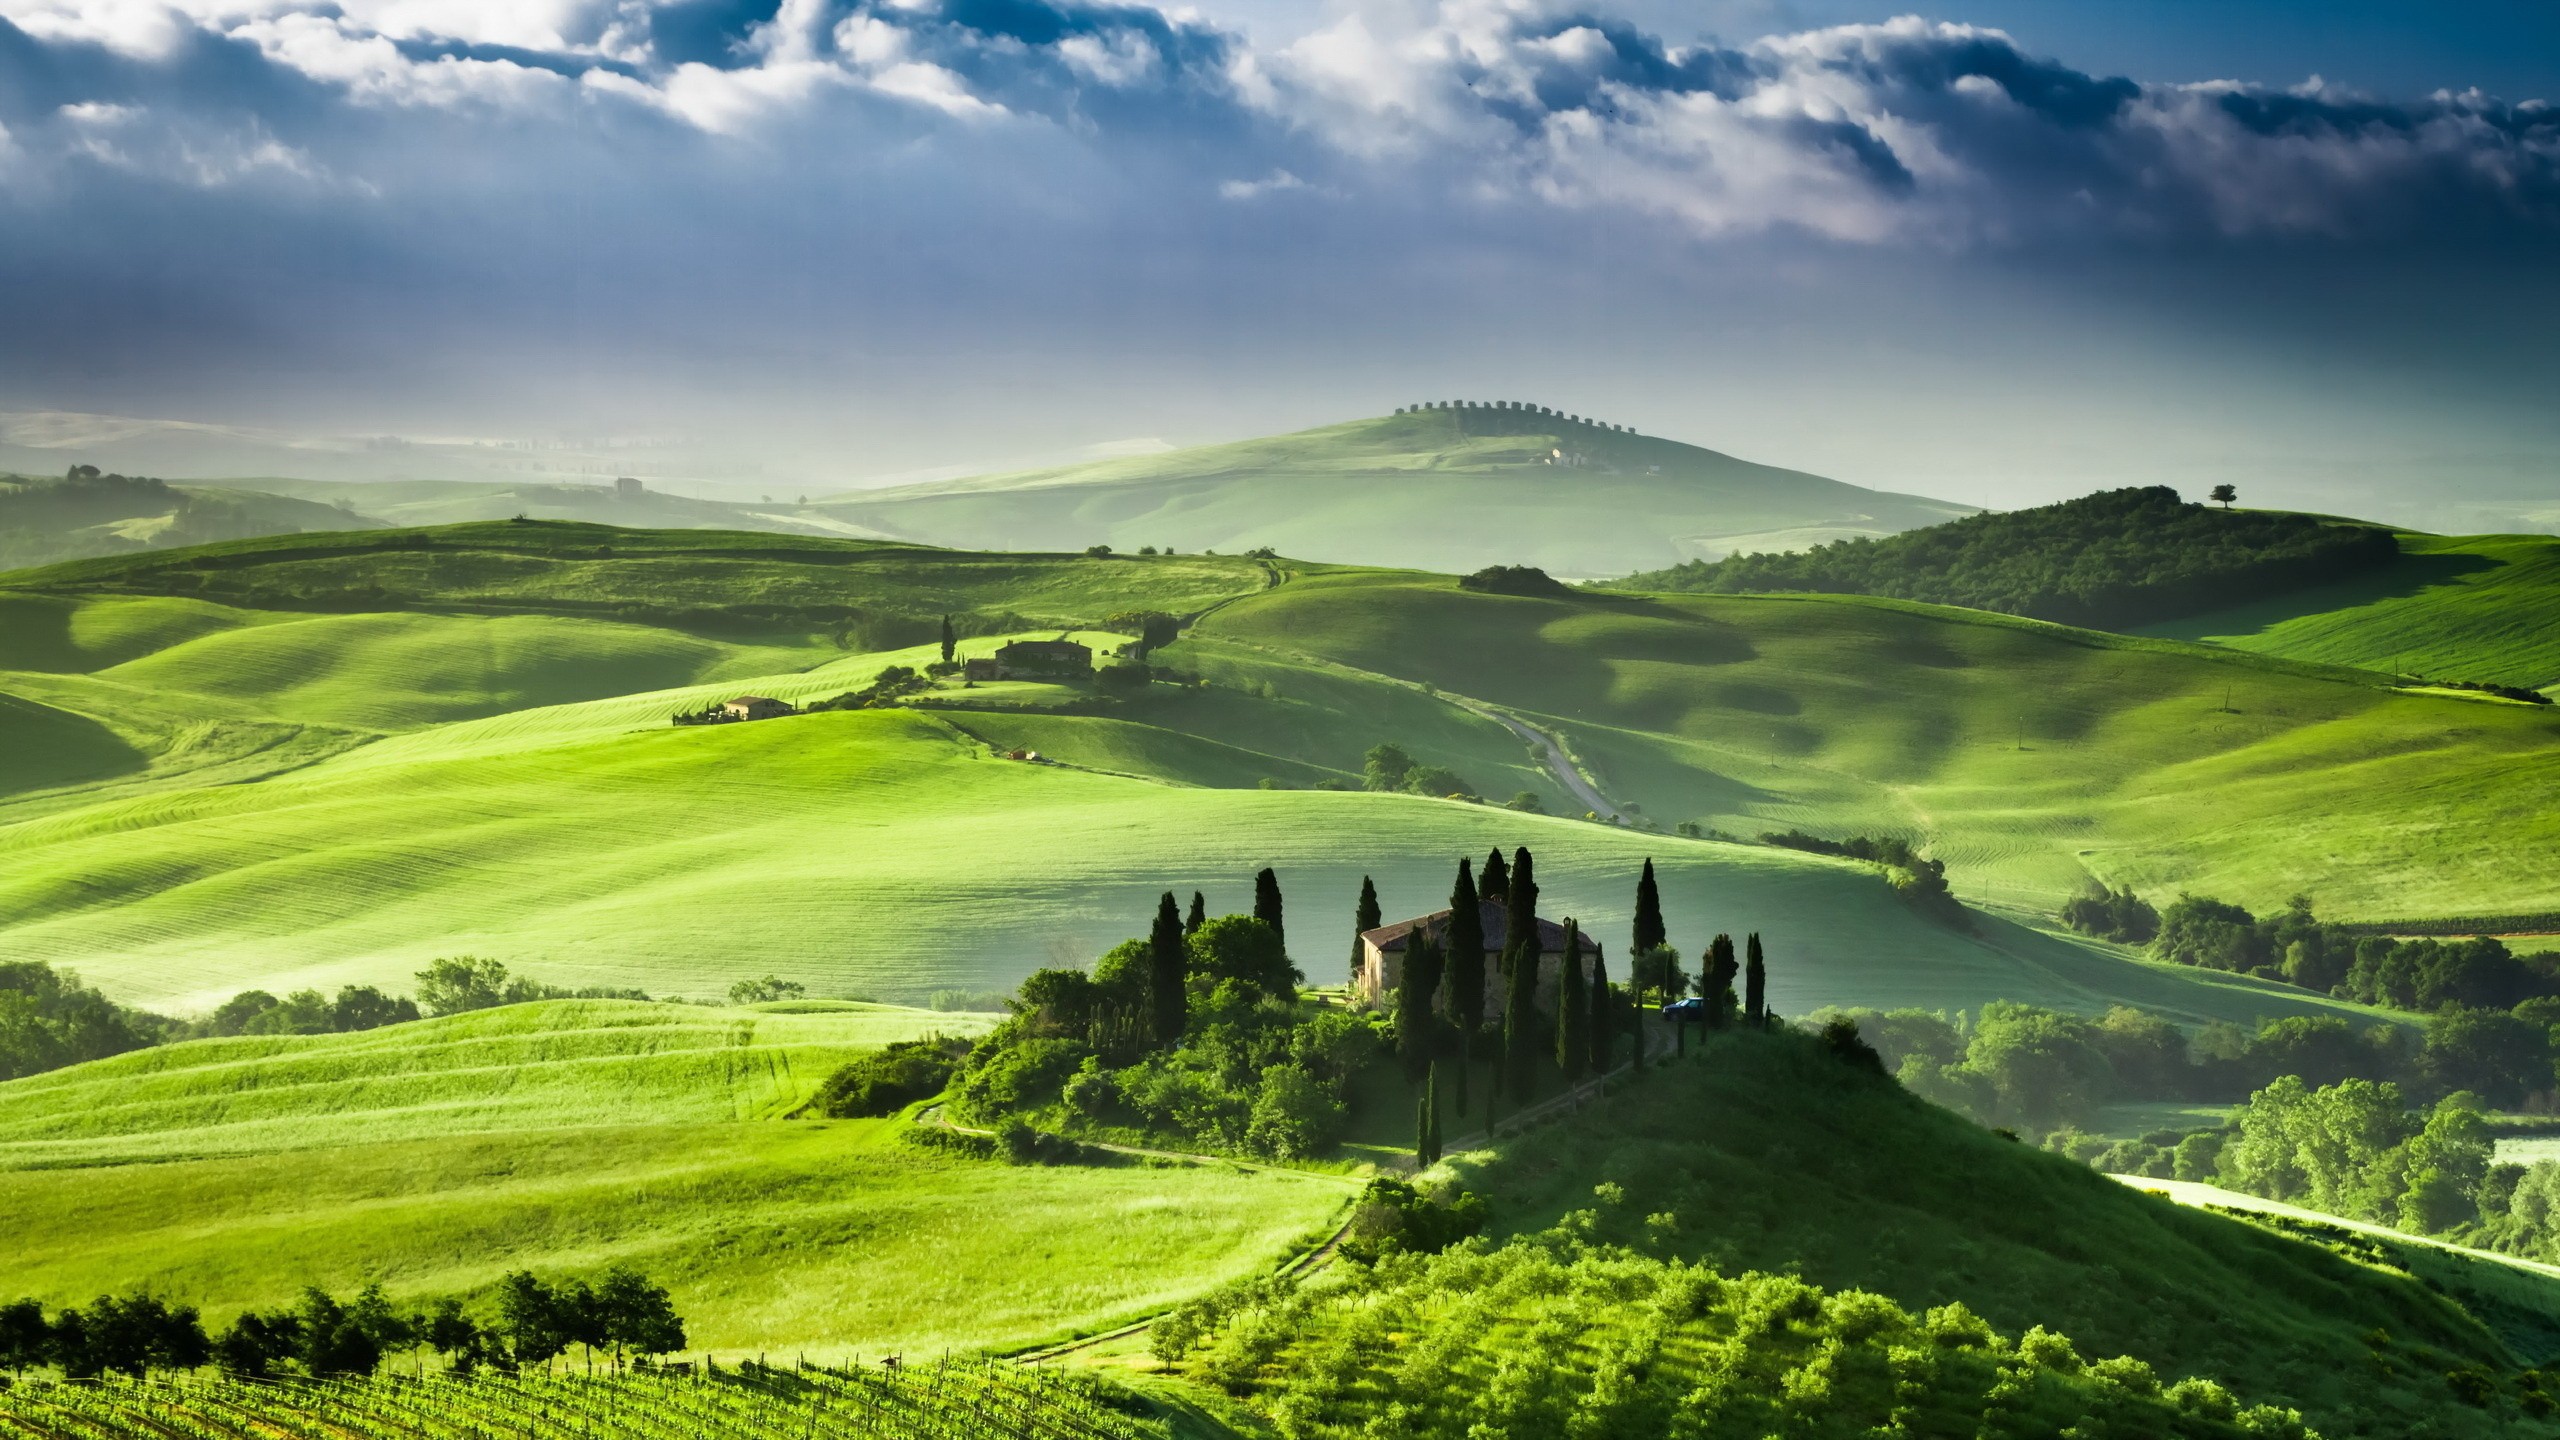 Landscape Italy Wallpaper And Image Pictures Photos